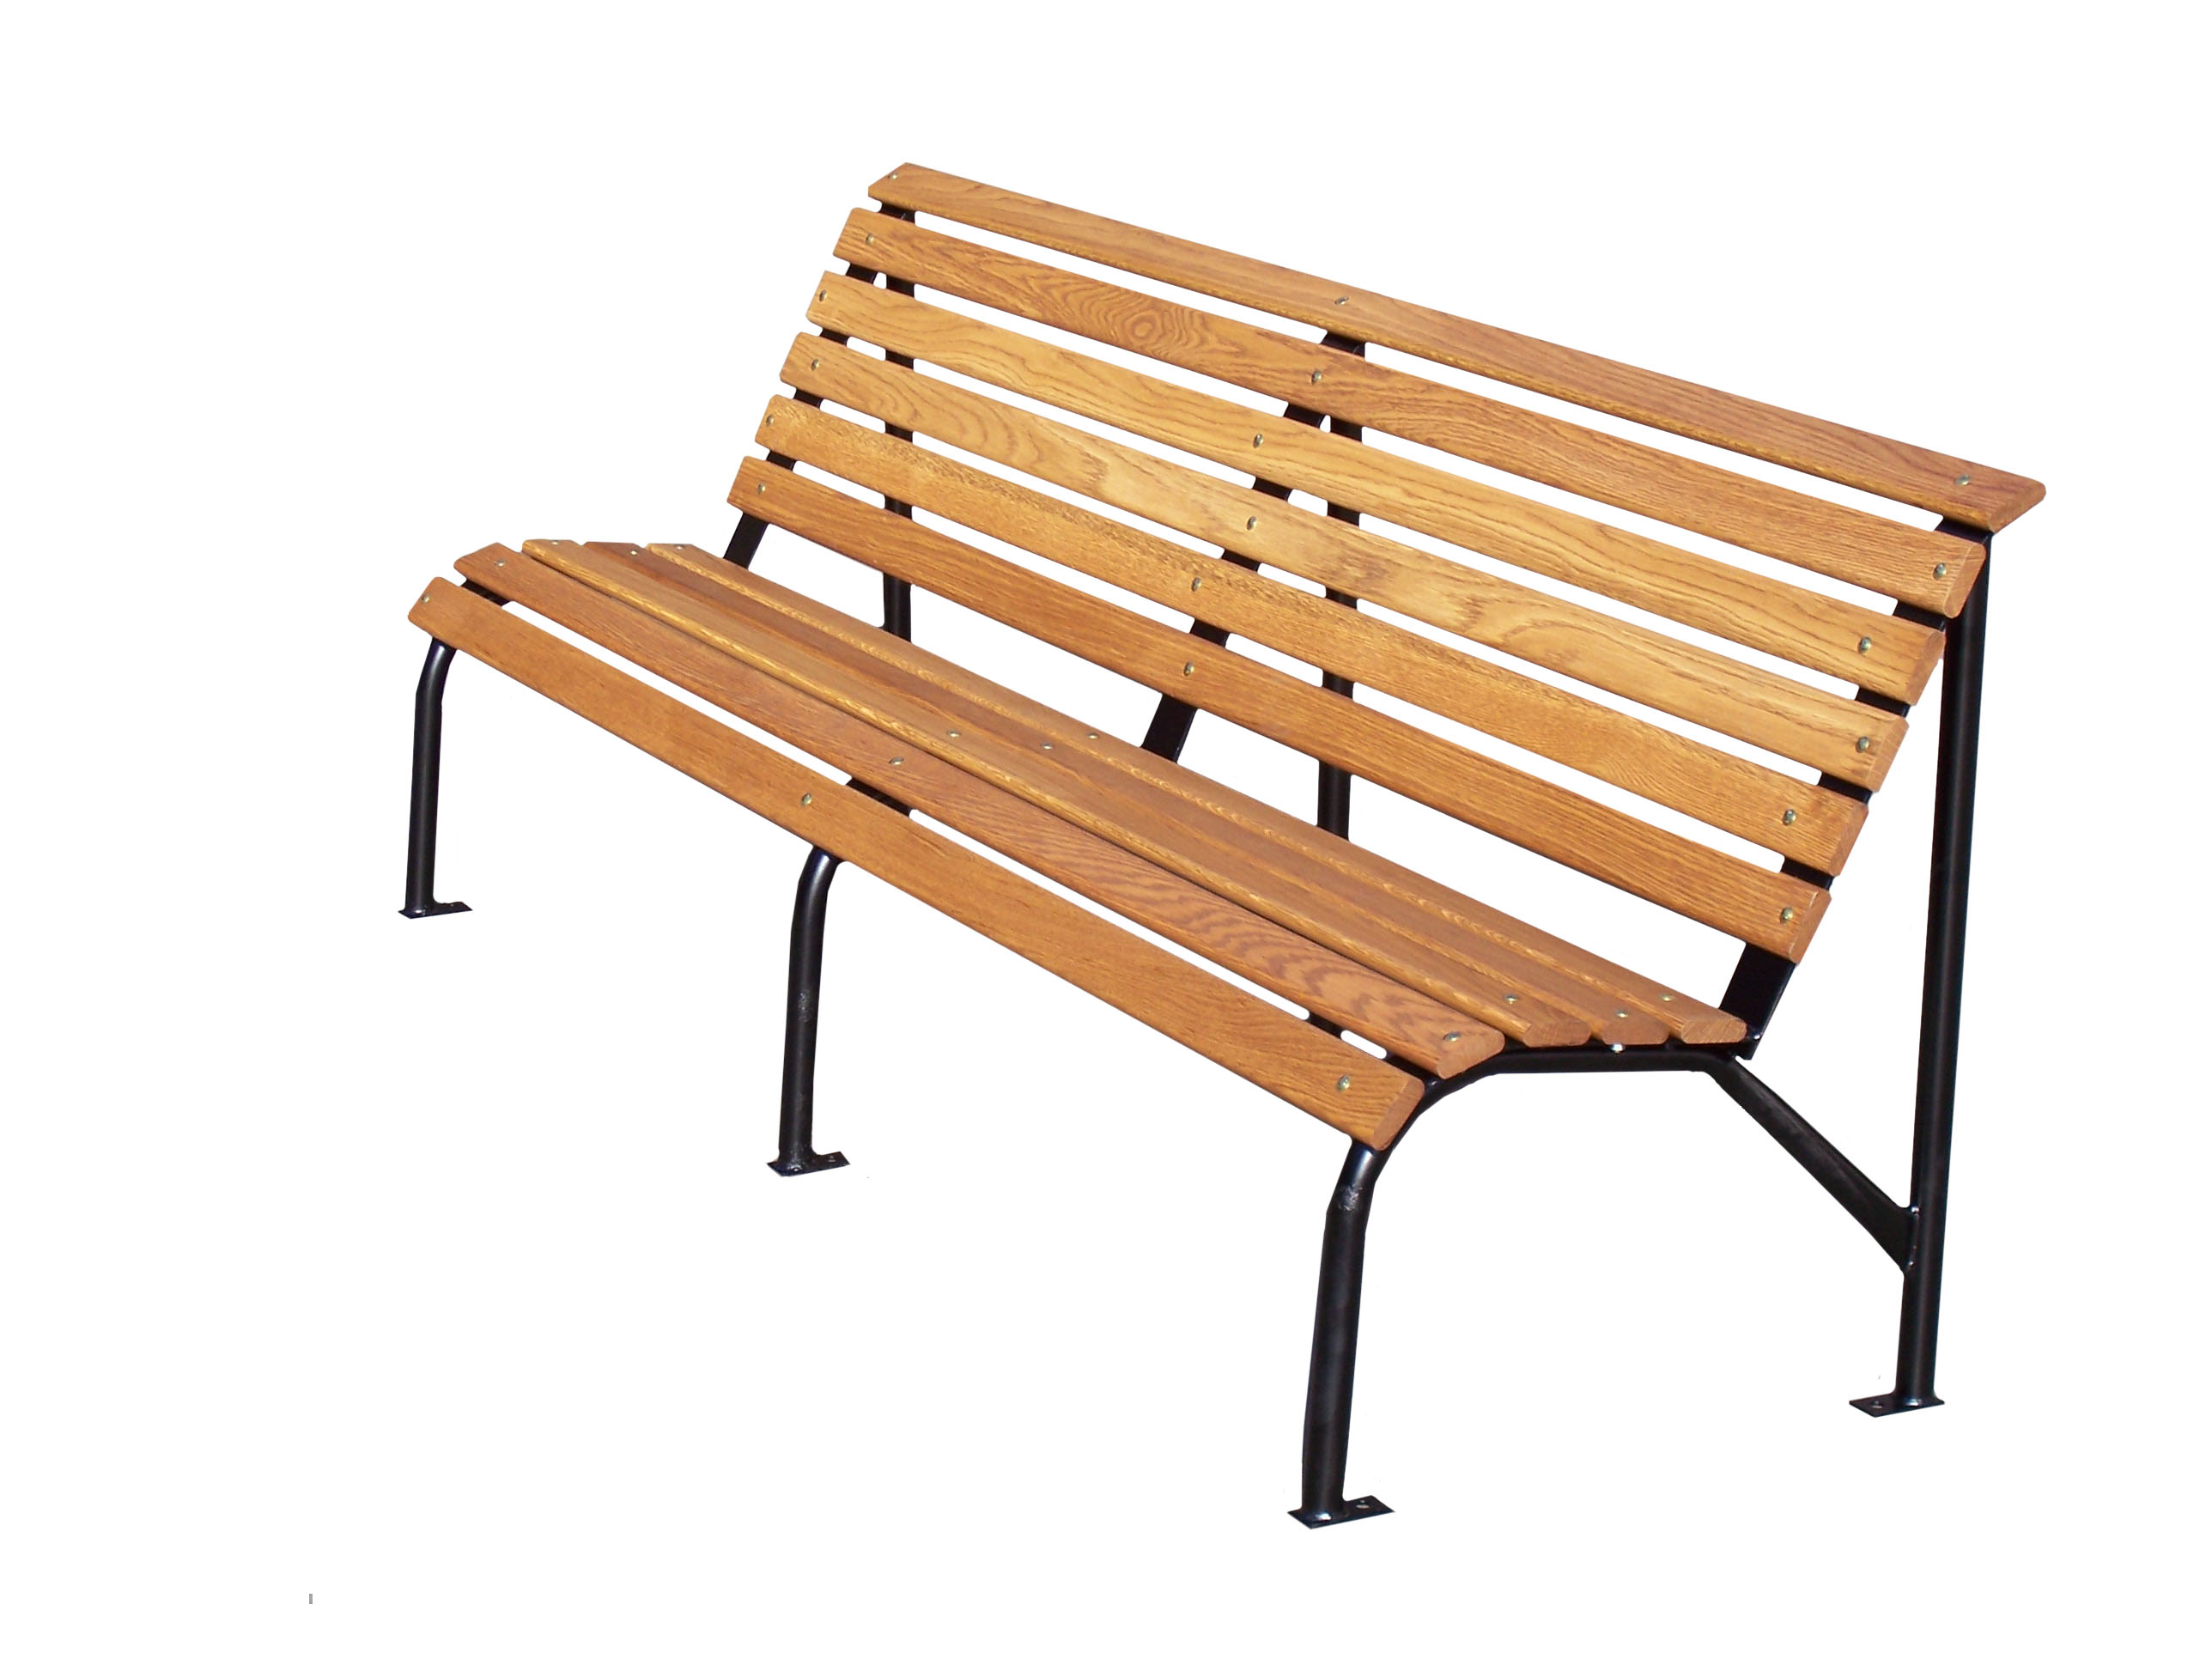 Wooden Benches | Wooden Park Benches | Outdoor Wooden Benches